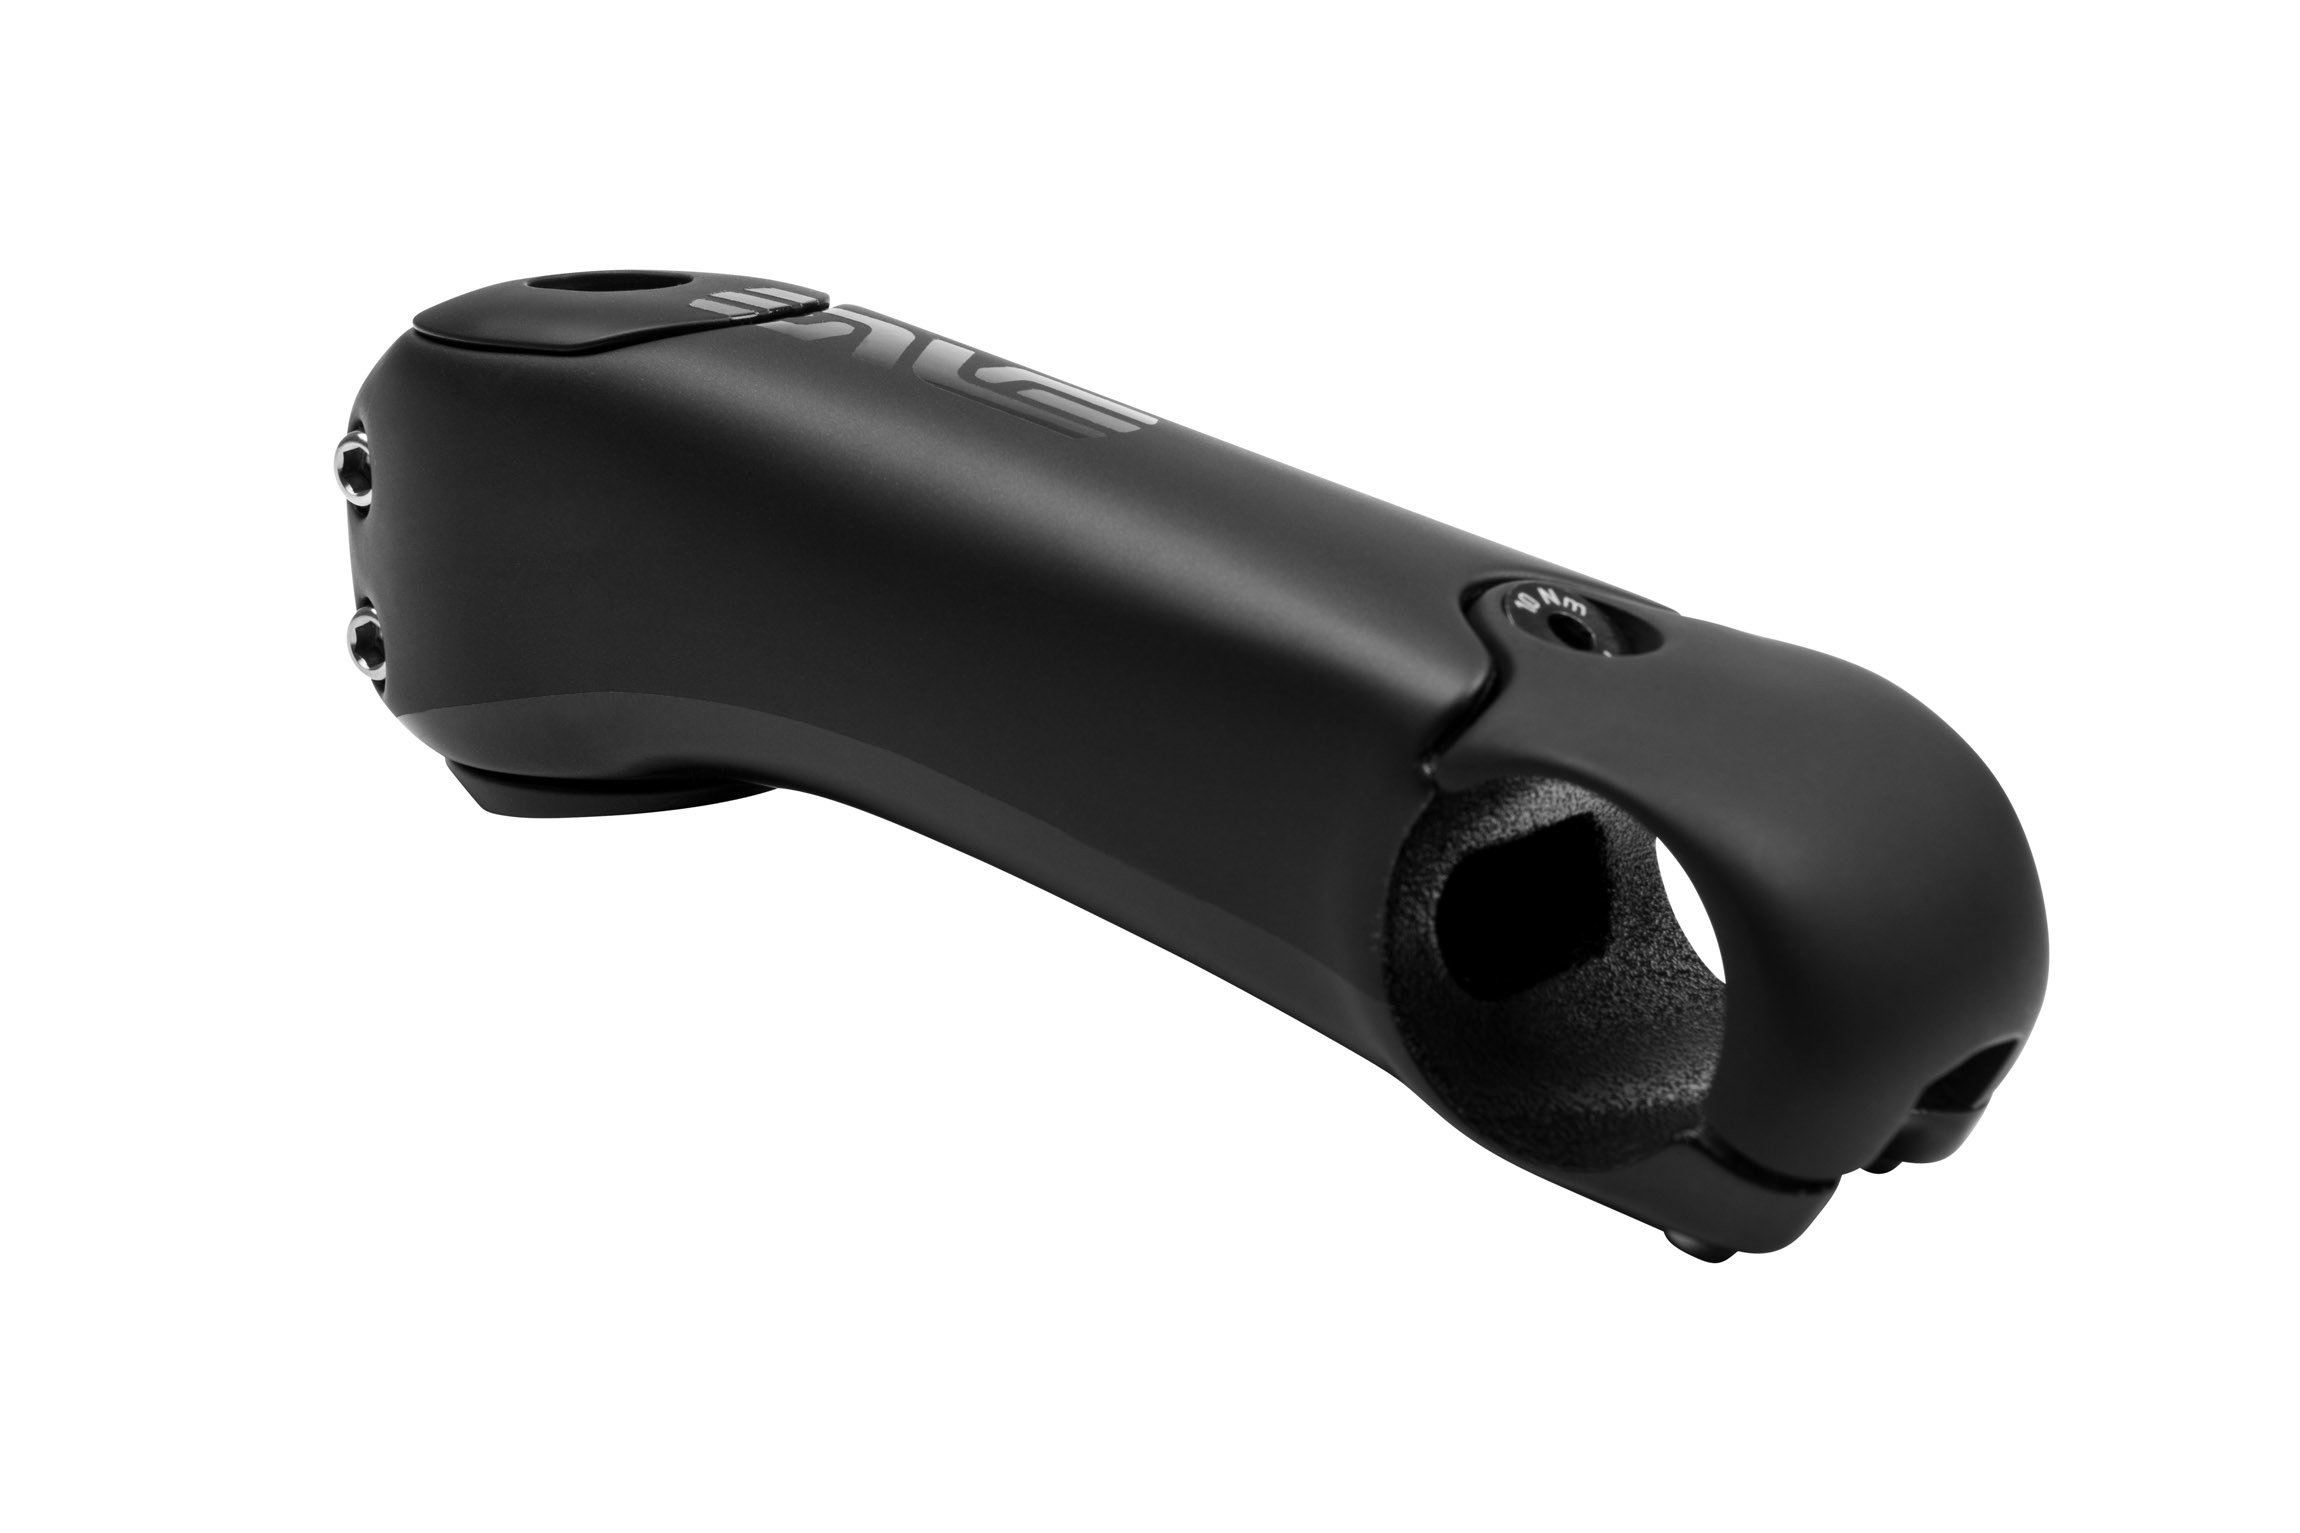 Smart ENVE System grows with the addition of new SES Aero Road stem